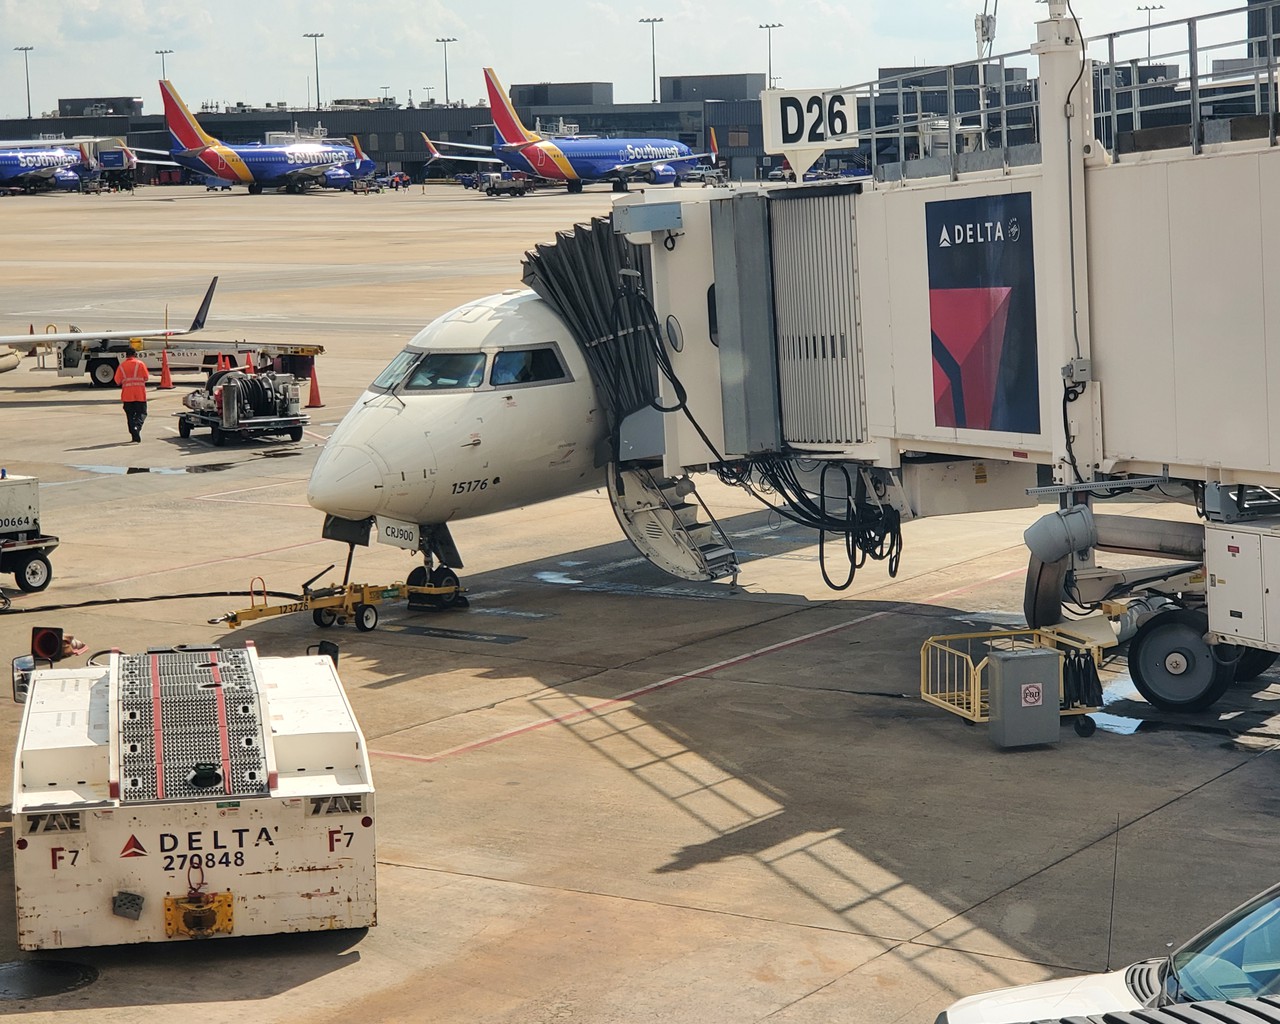 Review of Delta Air Lines flight from Atlanta to Roanoke in Premium Eco